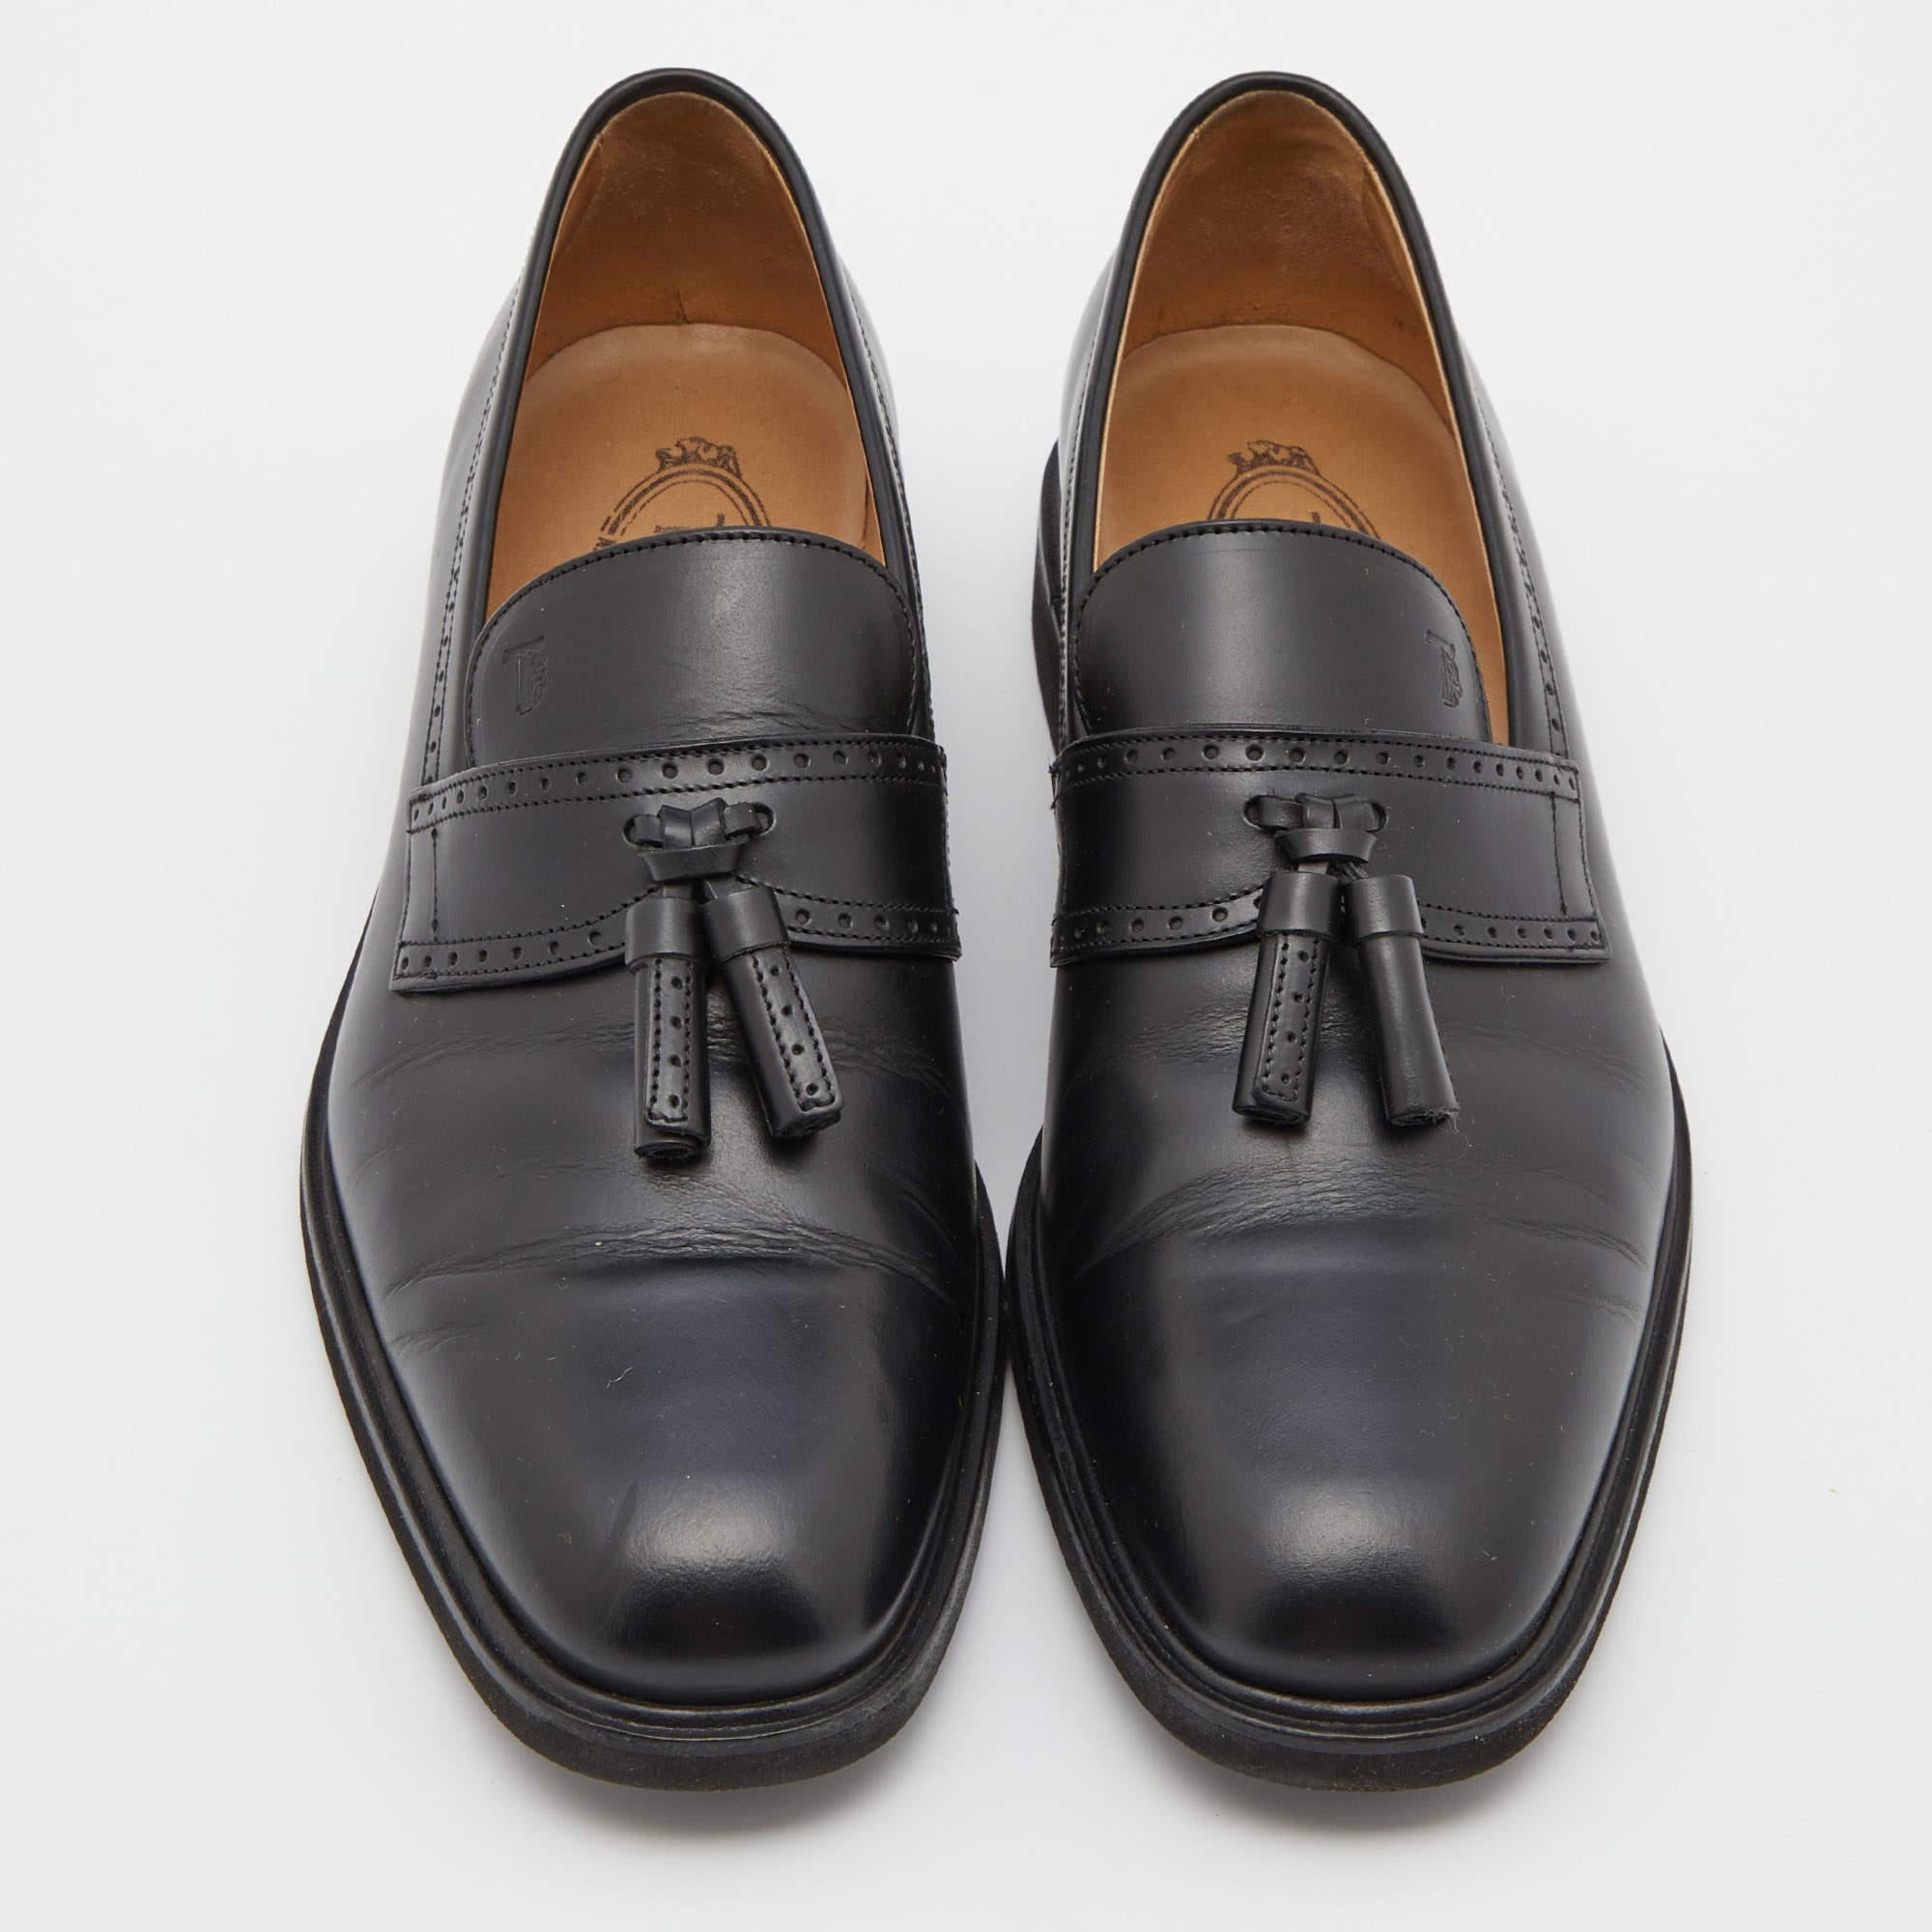 Practical, fashionable, and durable—these designer loafers are carefully built to be fine companions to your everyday style. They come made using the best materials to be a prized buy.

Includes: Original Box, Info Booklet
